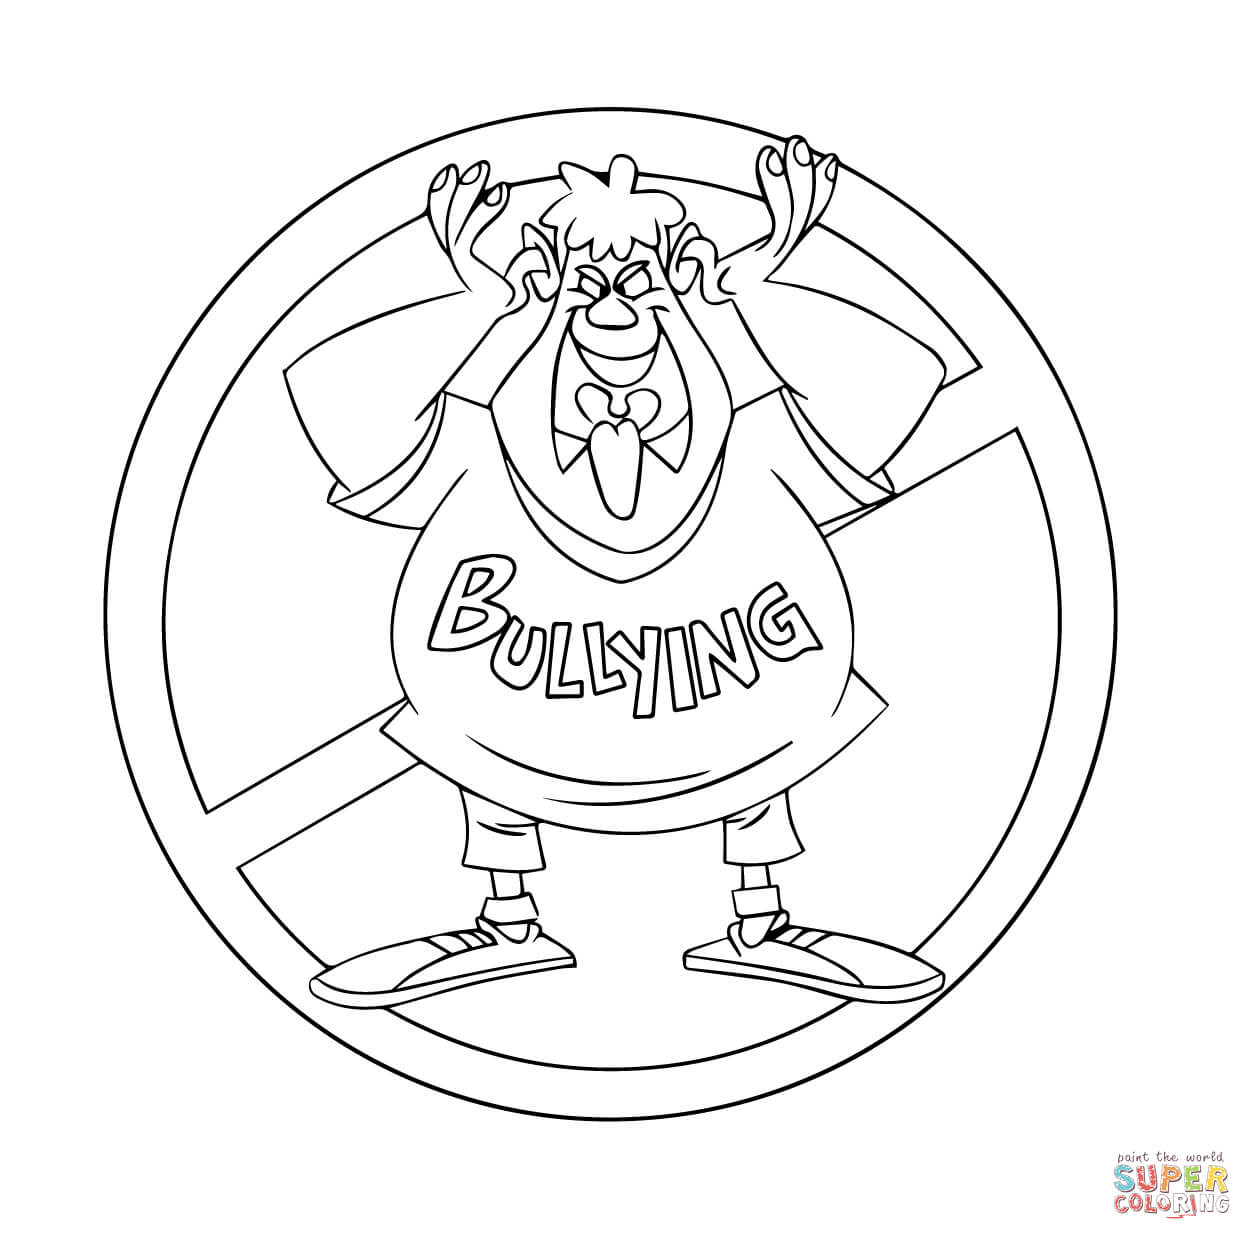 No to Bullying Troll coloring page | Free Printable Coloring Pages